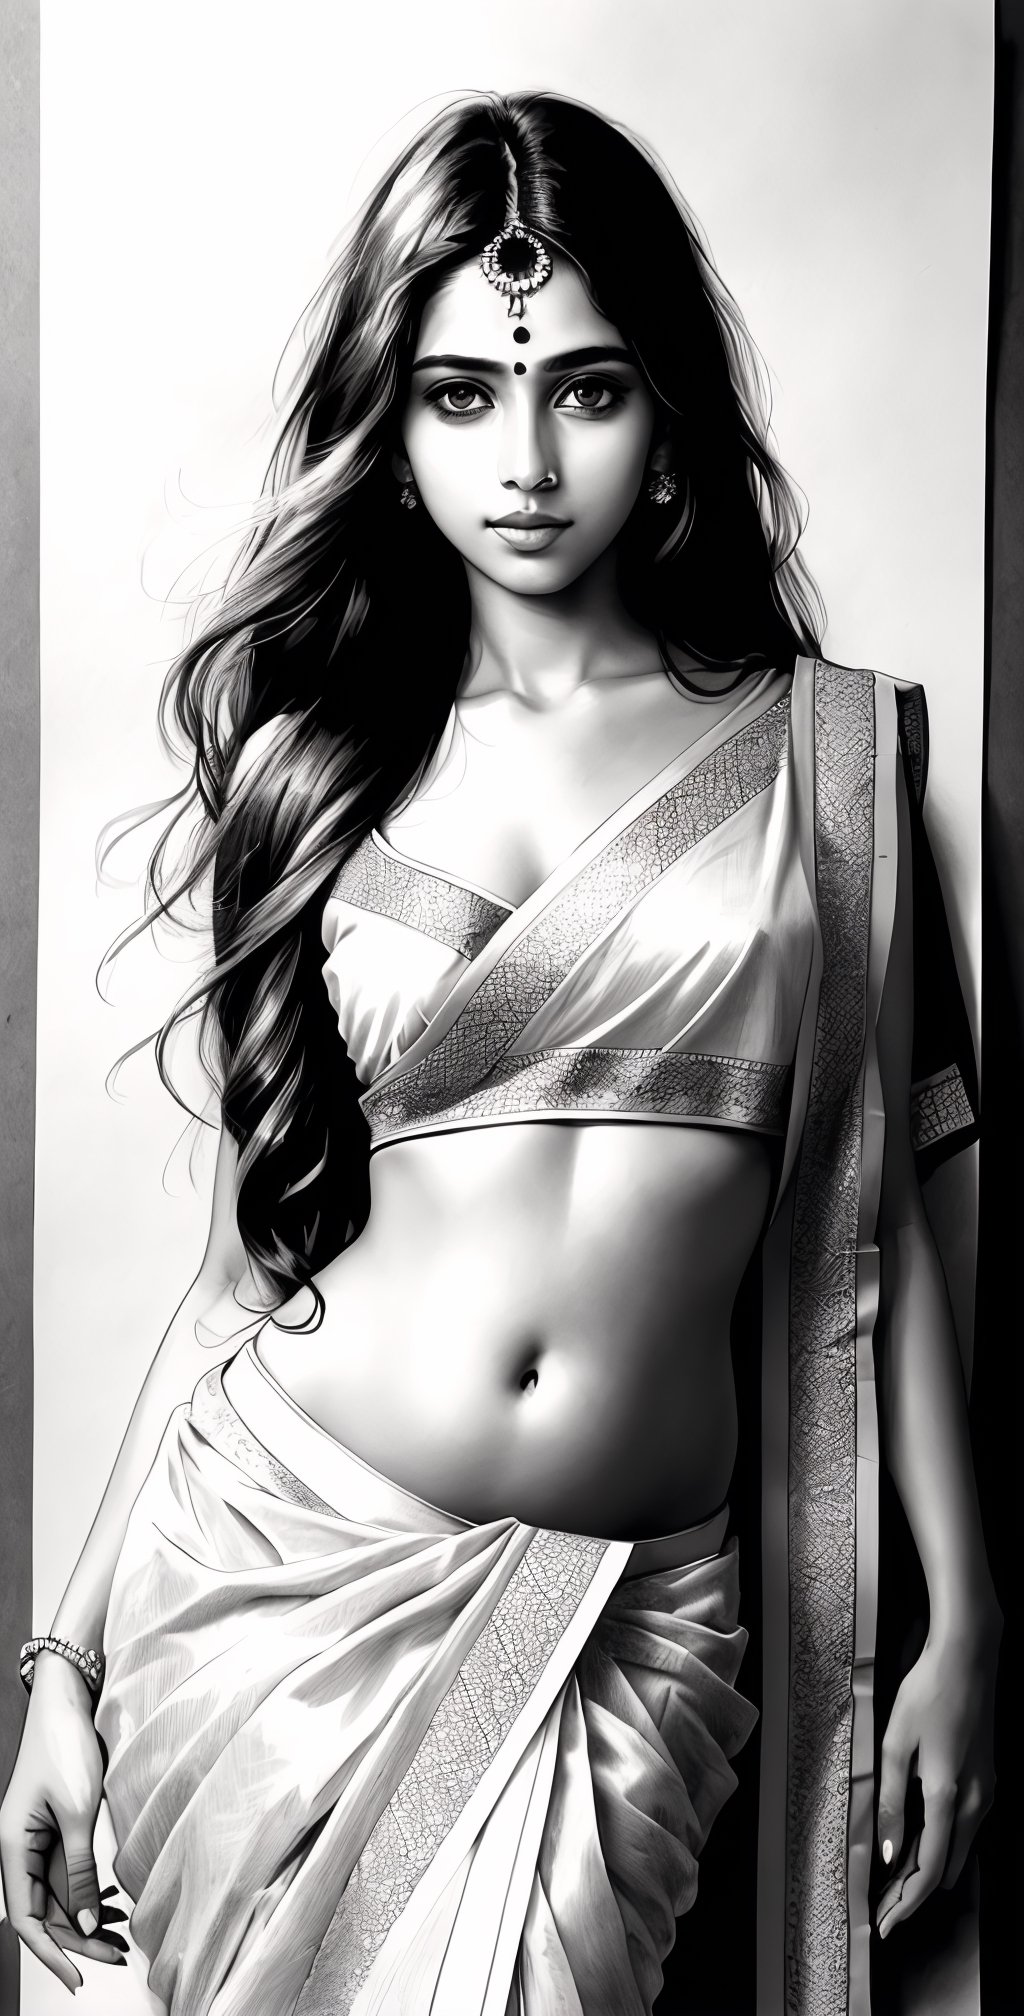 Pencil sketch, pencil sketch portrait of beautiful indian girl with long hair, blue eyes, embarrassed, nice figure, slim belly, Indian revealed saree, Art, black and white sketch, on white art paper, realistic sketch, ultra real sketch, pencil stroke sketch, pencil stroke shadow, perfect real light on paper, xyzsanart01,iinksketch,monochrome